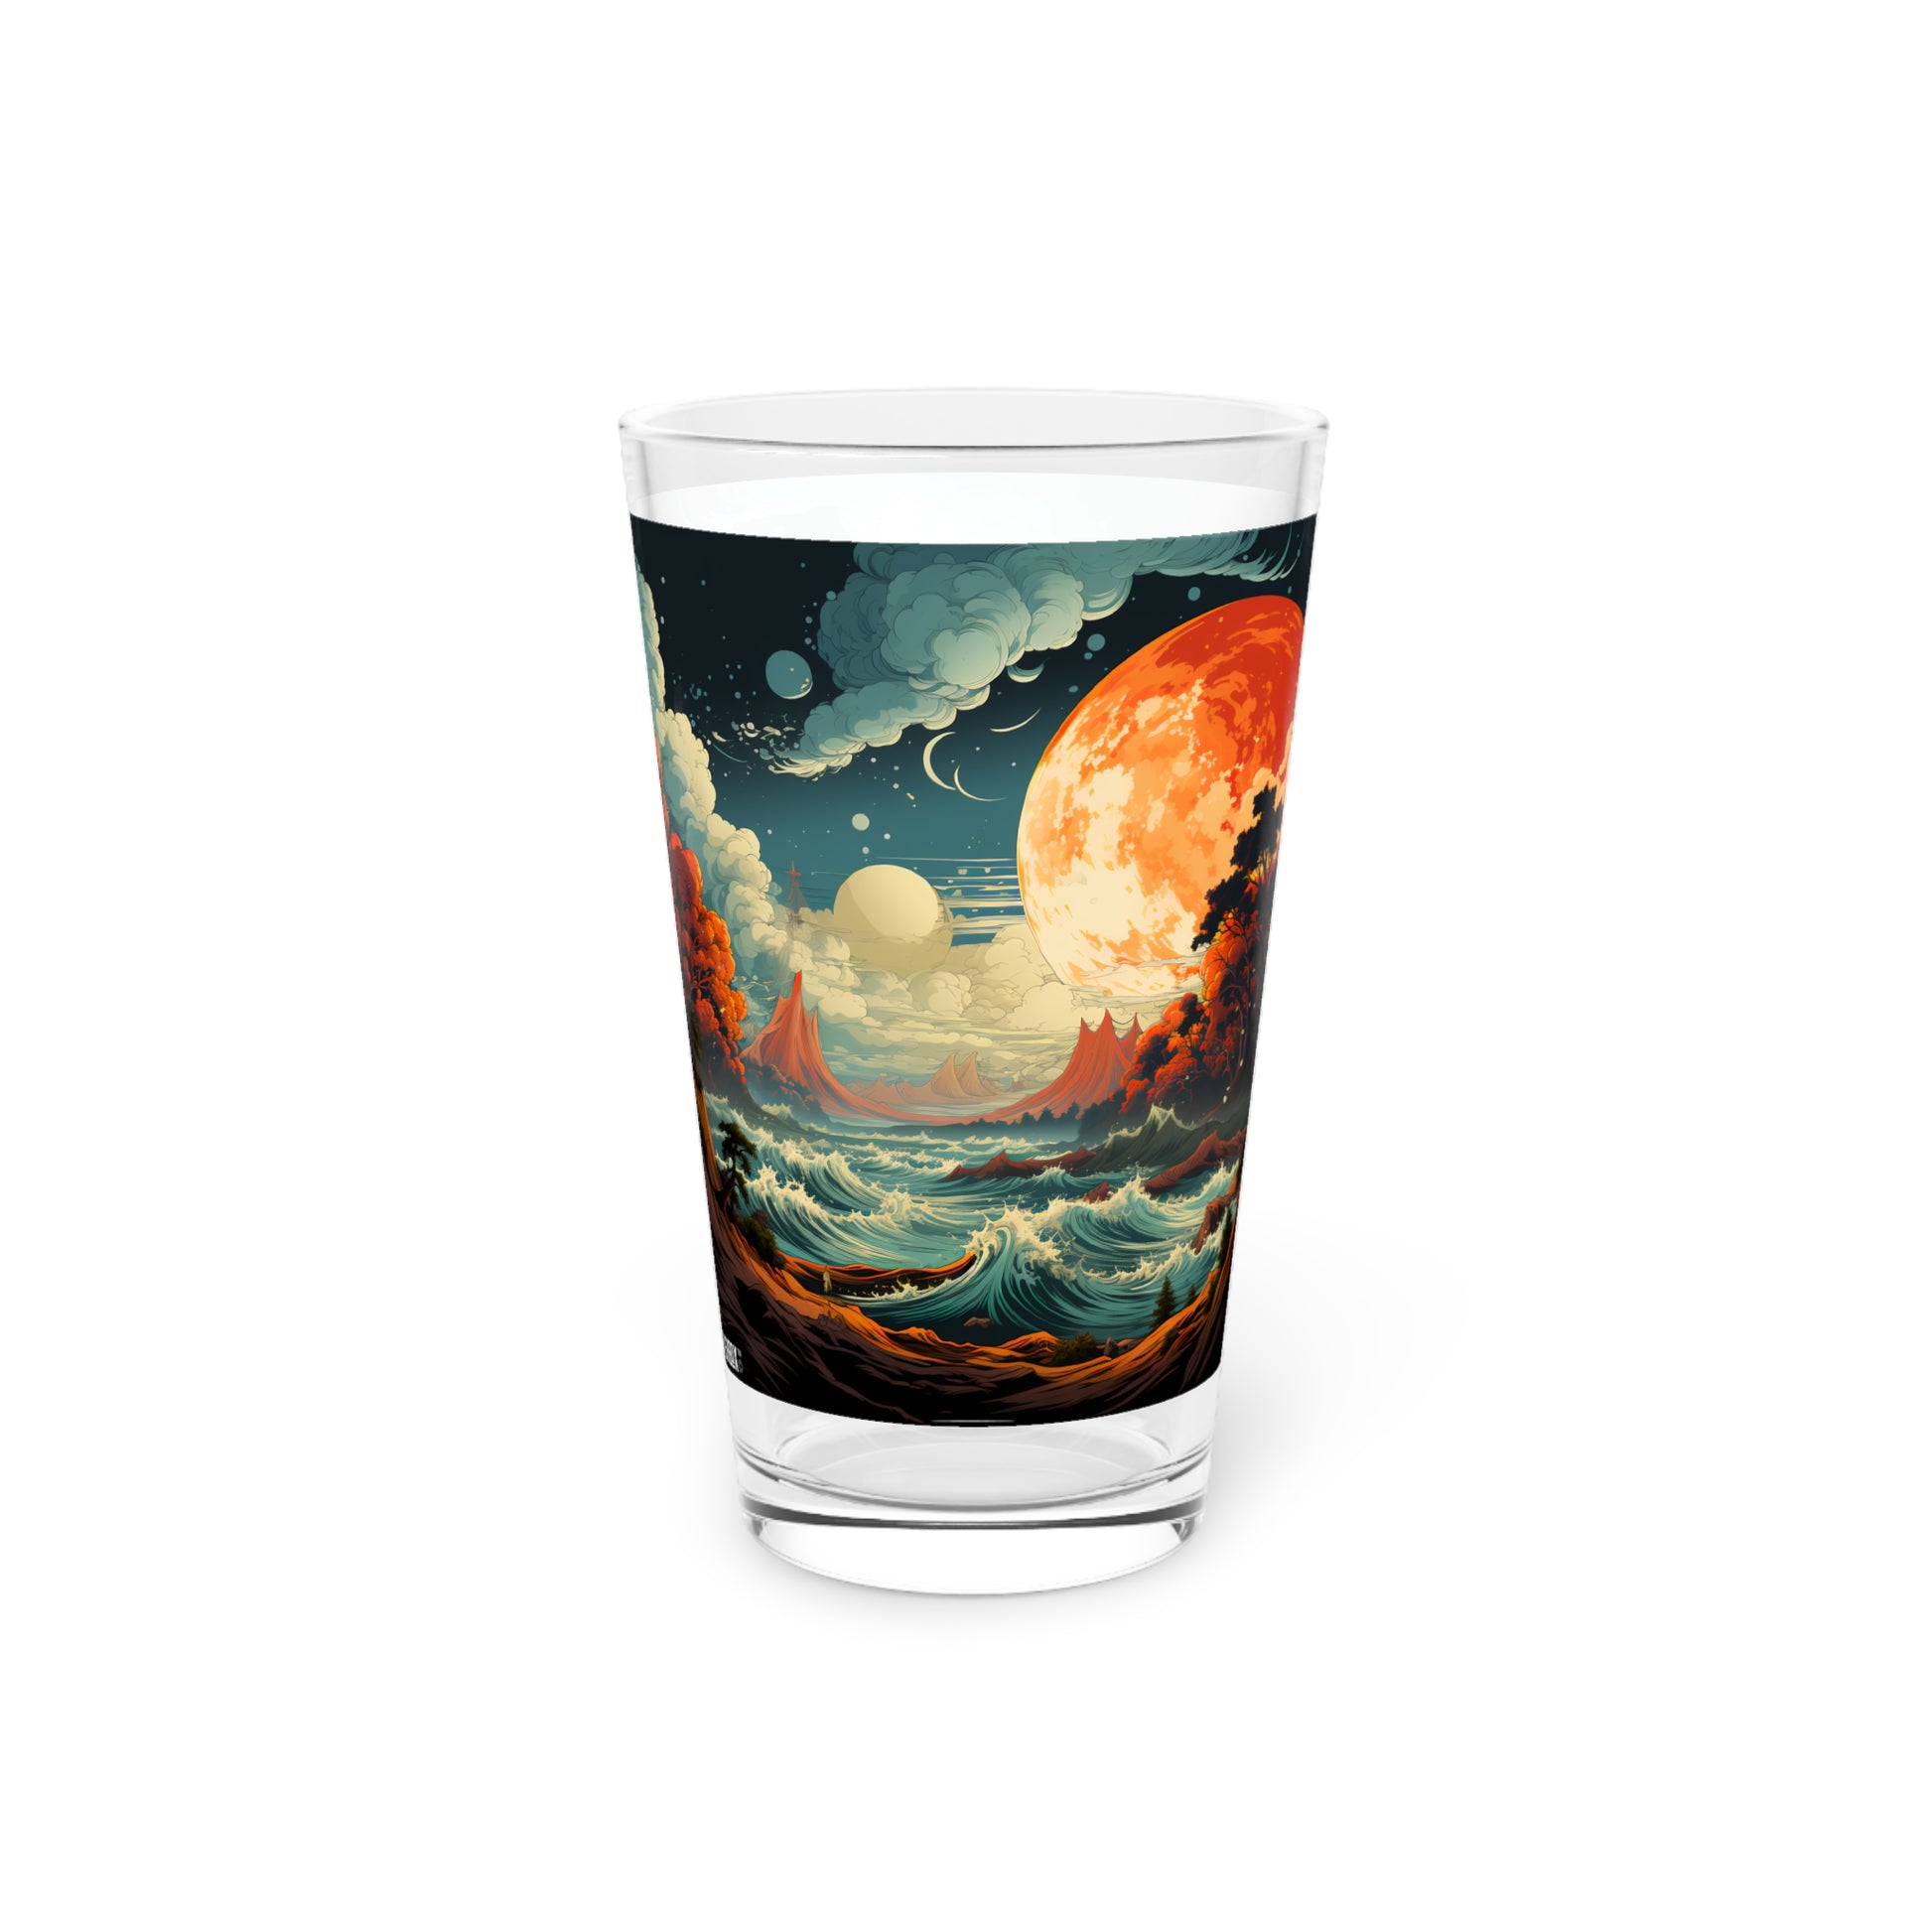 Dive into Beach Vibes: Spacy Colorful Beach Waves Pint Glass, 16oz - Waves Design #037. Experience the essence of the coast with this vibrant pint glass. Perfect for beach lovers and those who cherish colorful sunsets. #BeachLife #WaveDesign #CoastalVibe